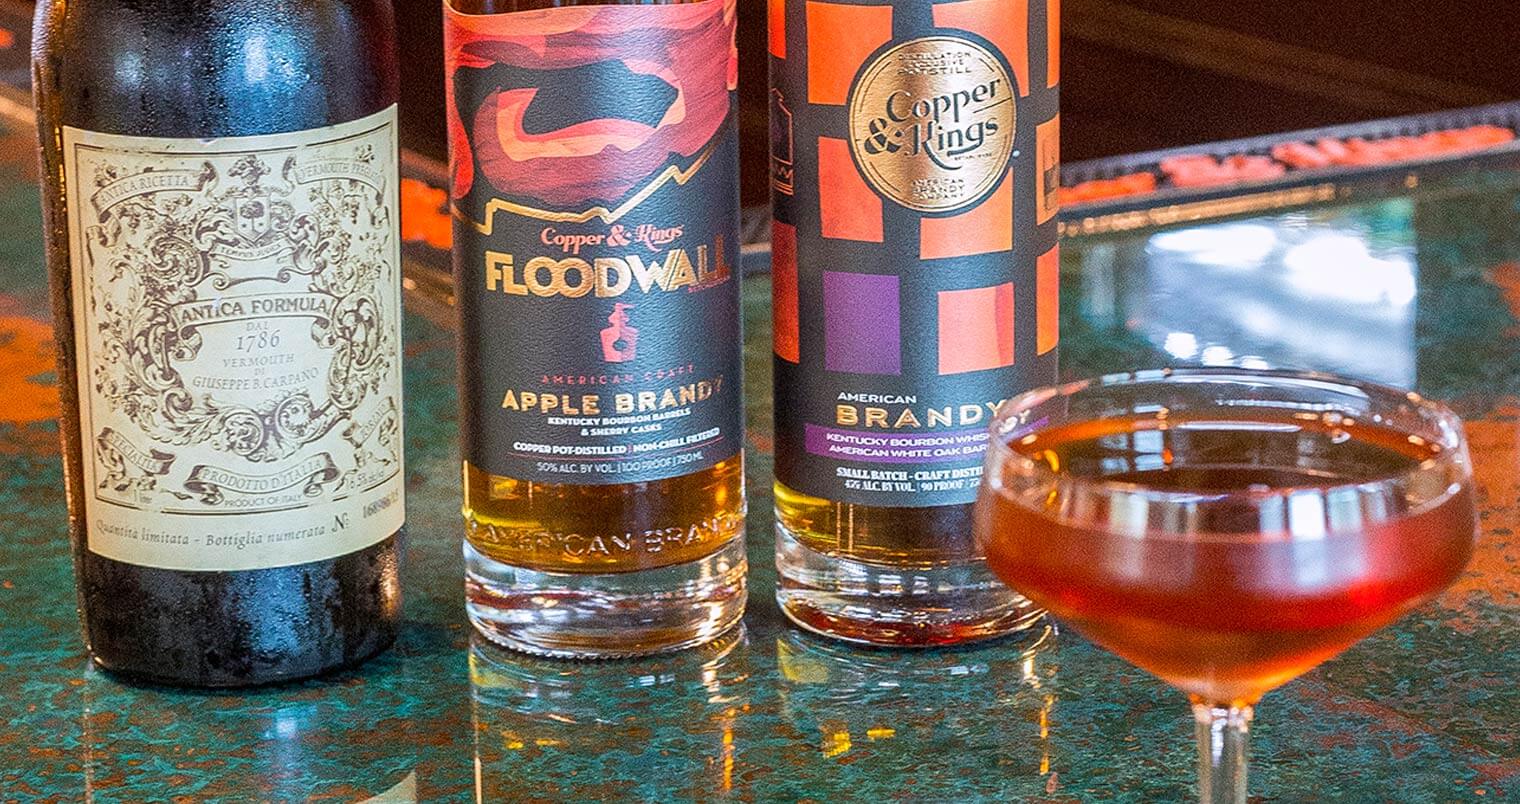 Copper & Kings Launches Floodwall American Apple Brandy, featured image